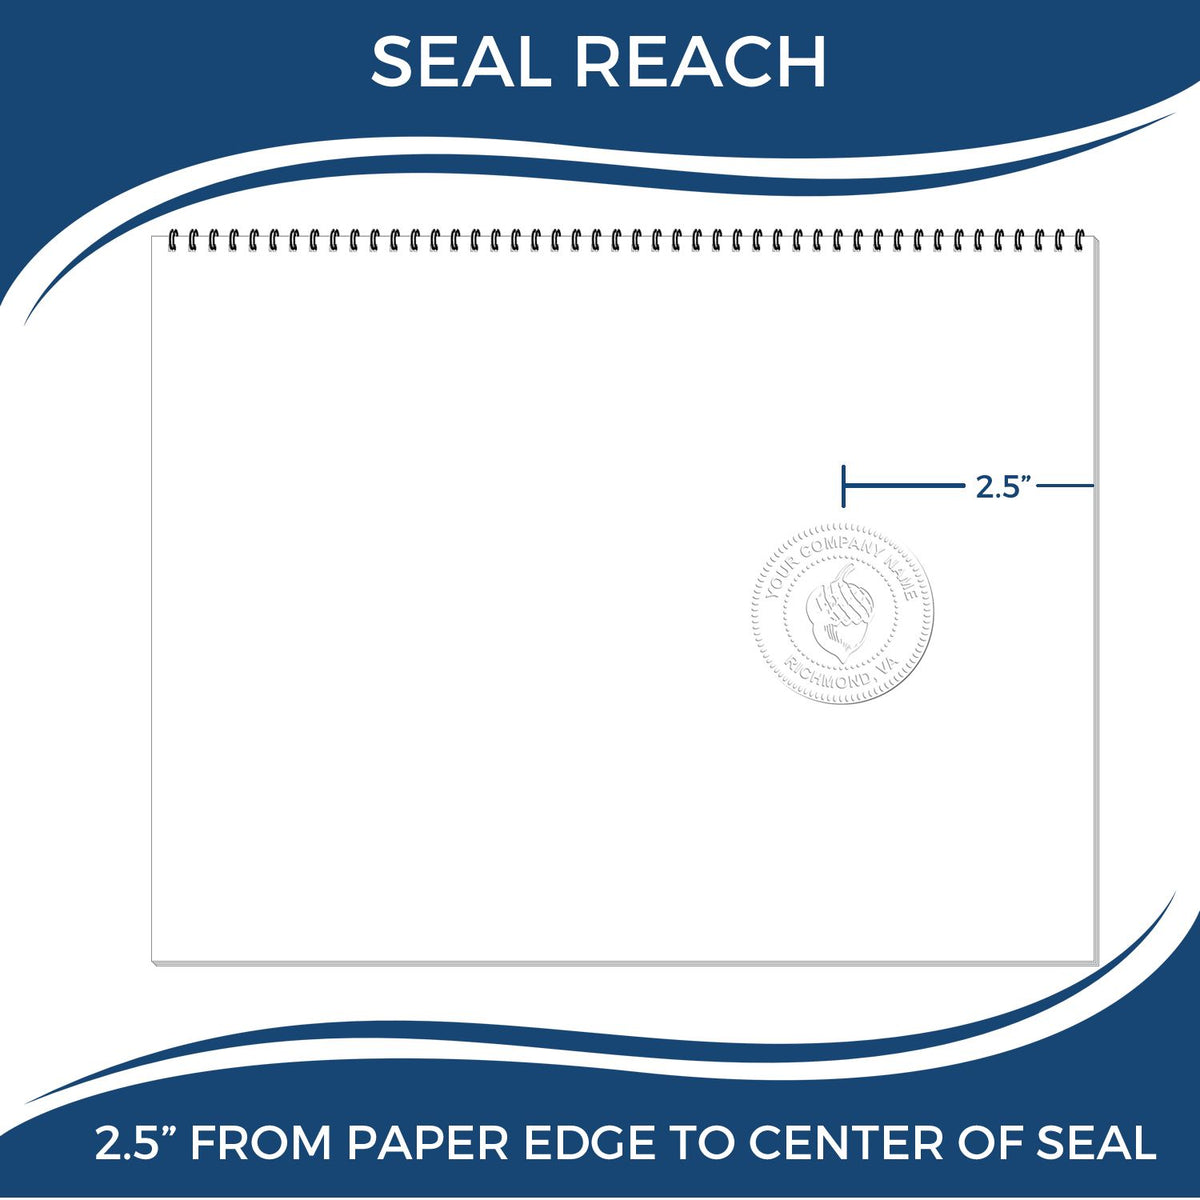 An infographic showing the seal reach which is represented by a ruler and a miniature seal image of the Heavy Duty Cast Iron Washington Architect Embosser